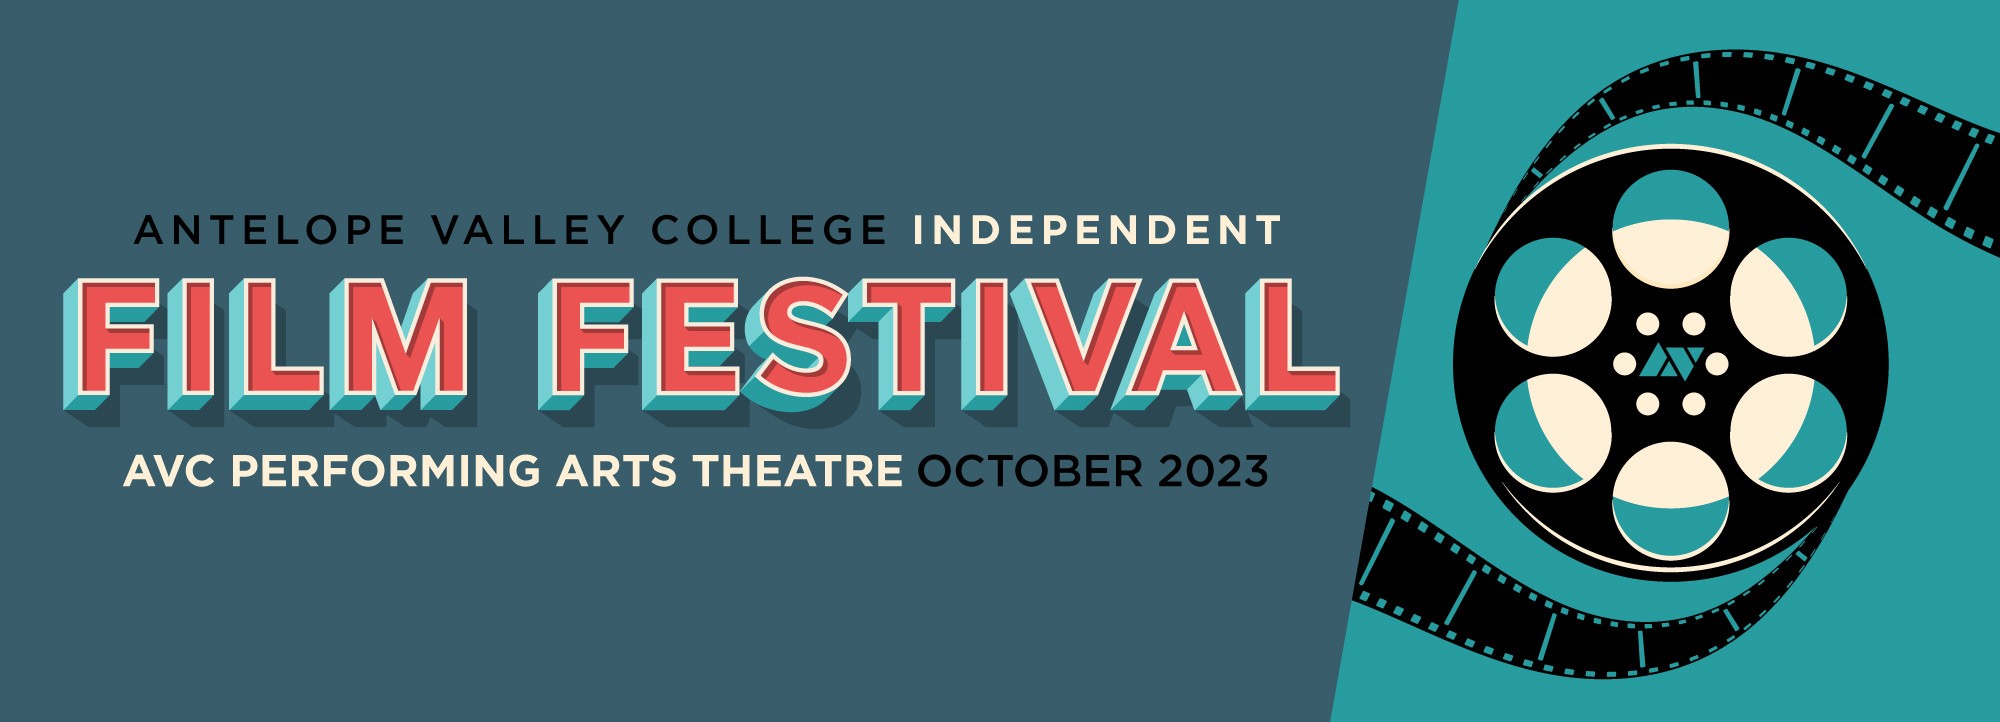 AVC Film Festival at the Performing Arts Theatre in October